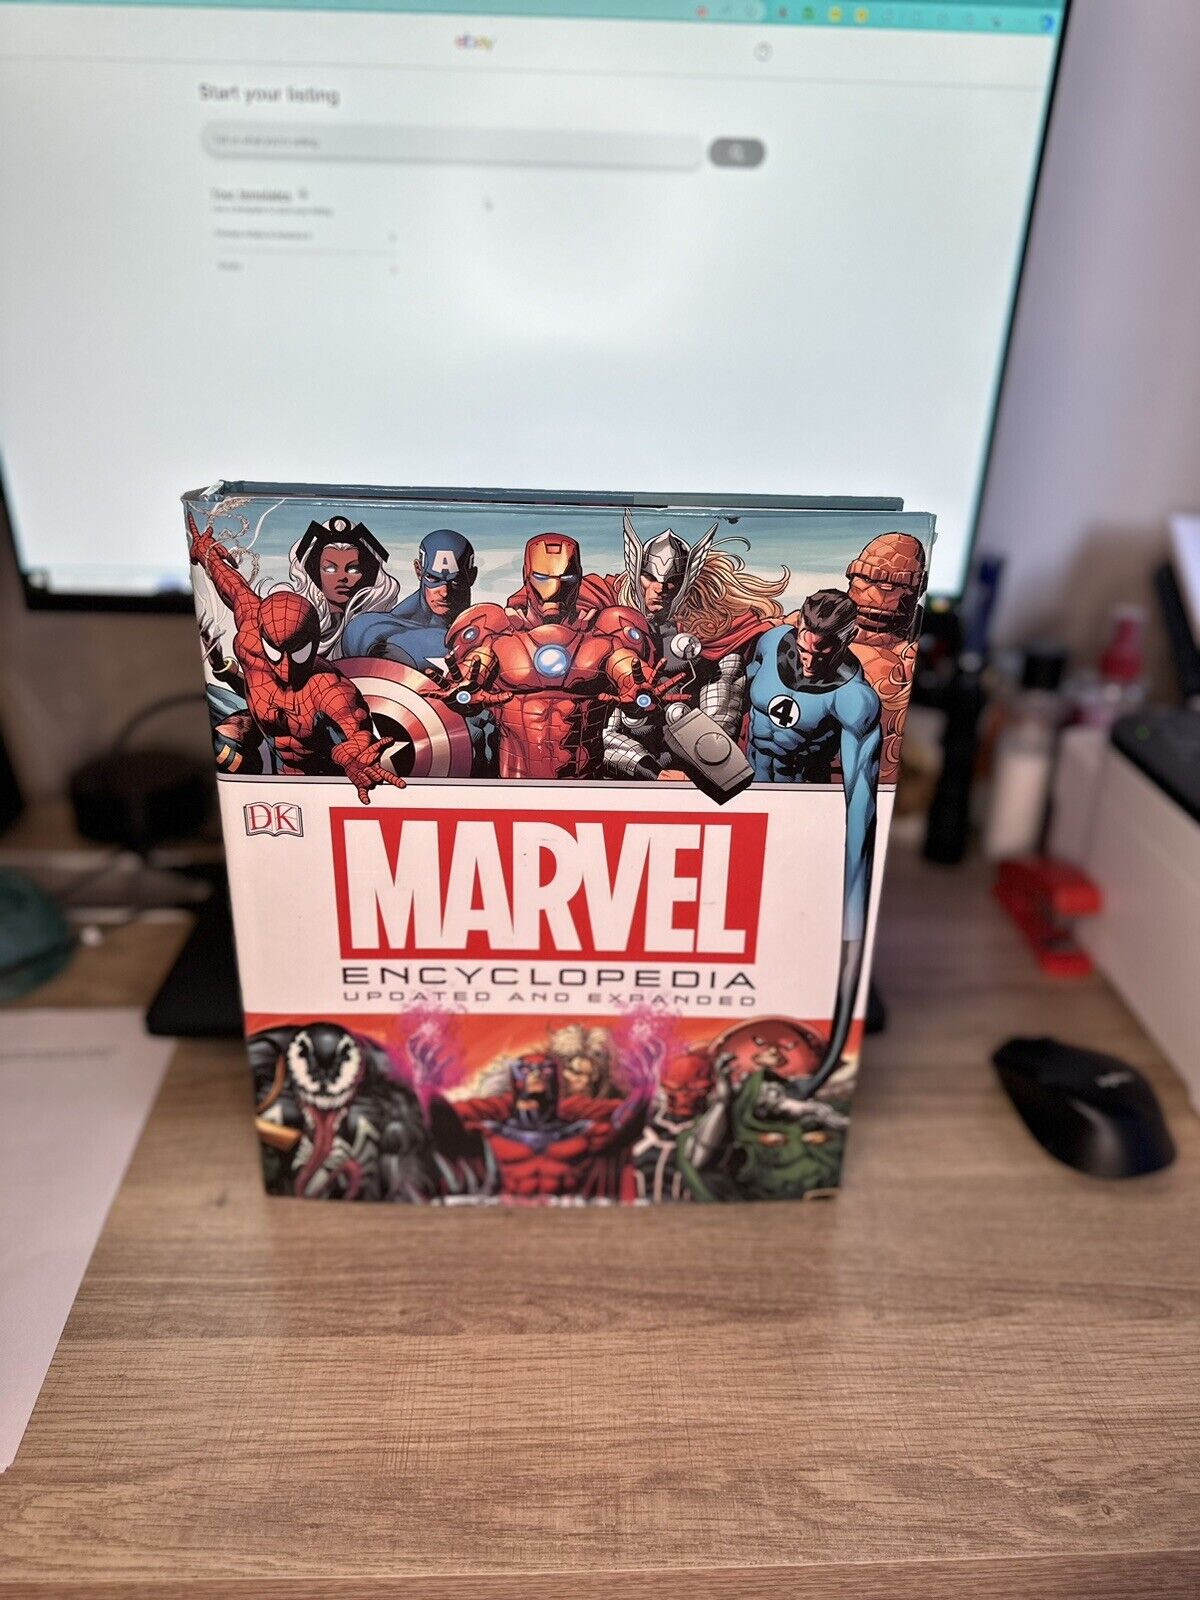 Marvel Encyclopedia Updated and Expanded - 2015 Hardcover